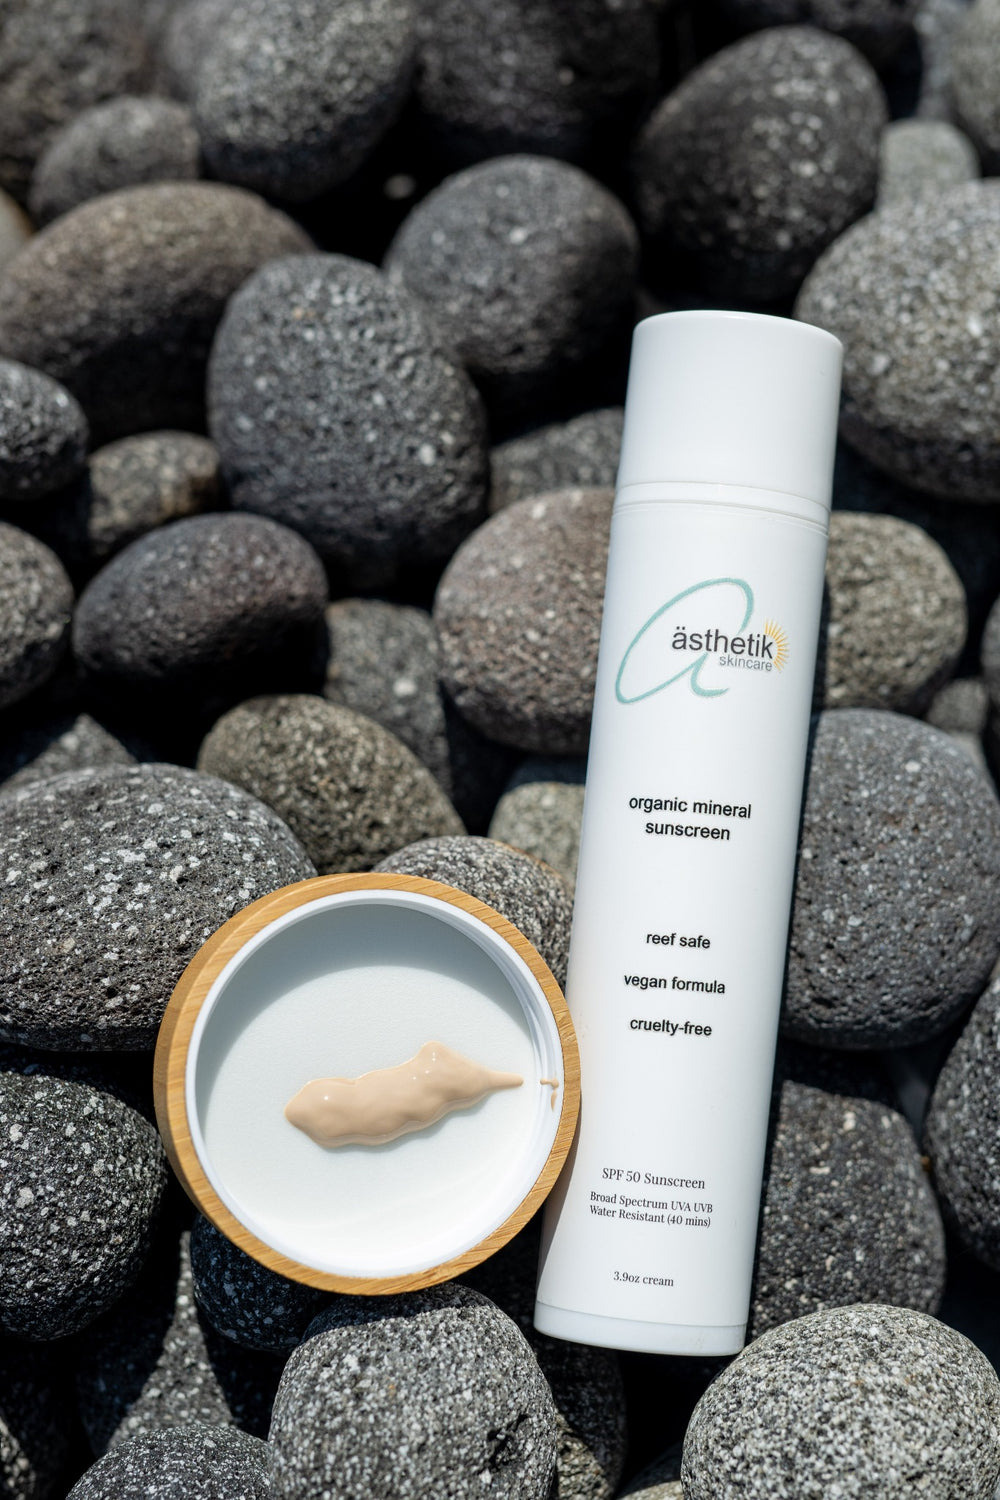 A bottle of ästhetik skincare organic tinted mineral sunscreen SPF 50 next to an open container with cream, all resting on a background of smooth grey stones.